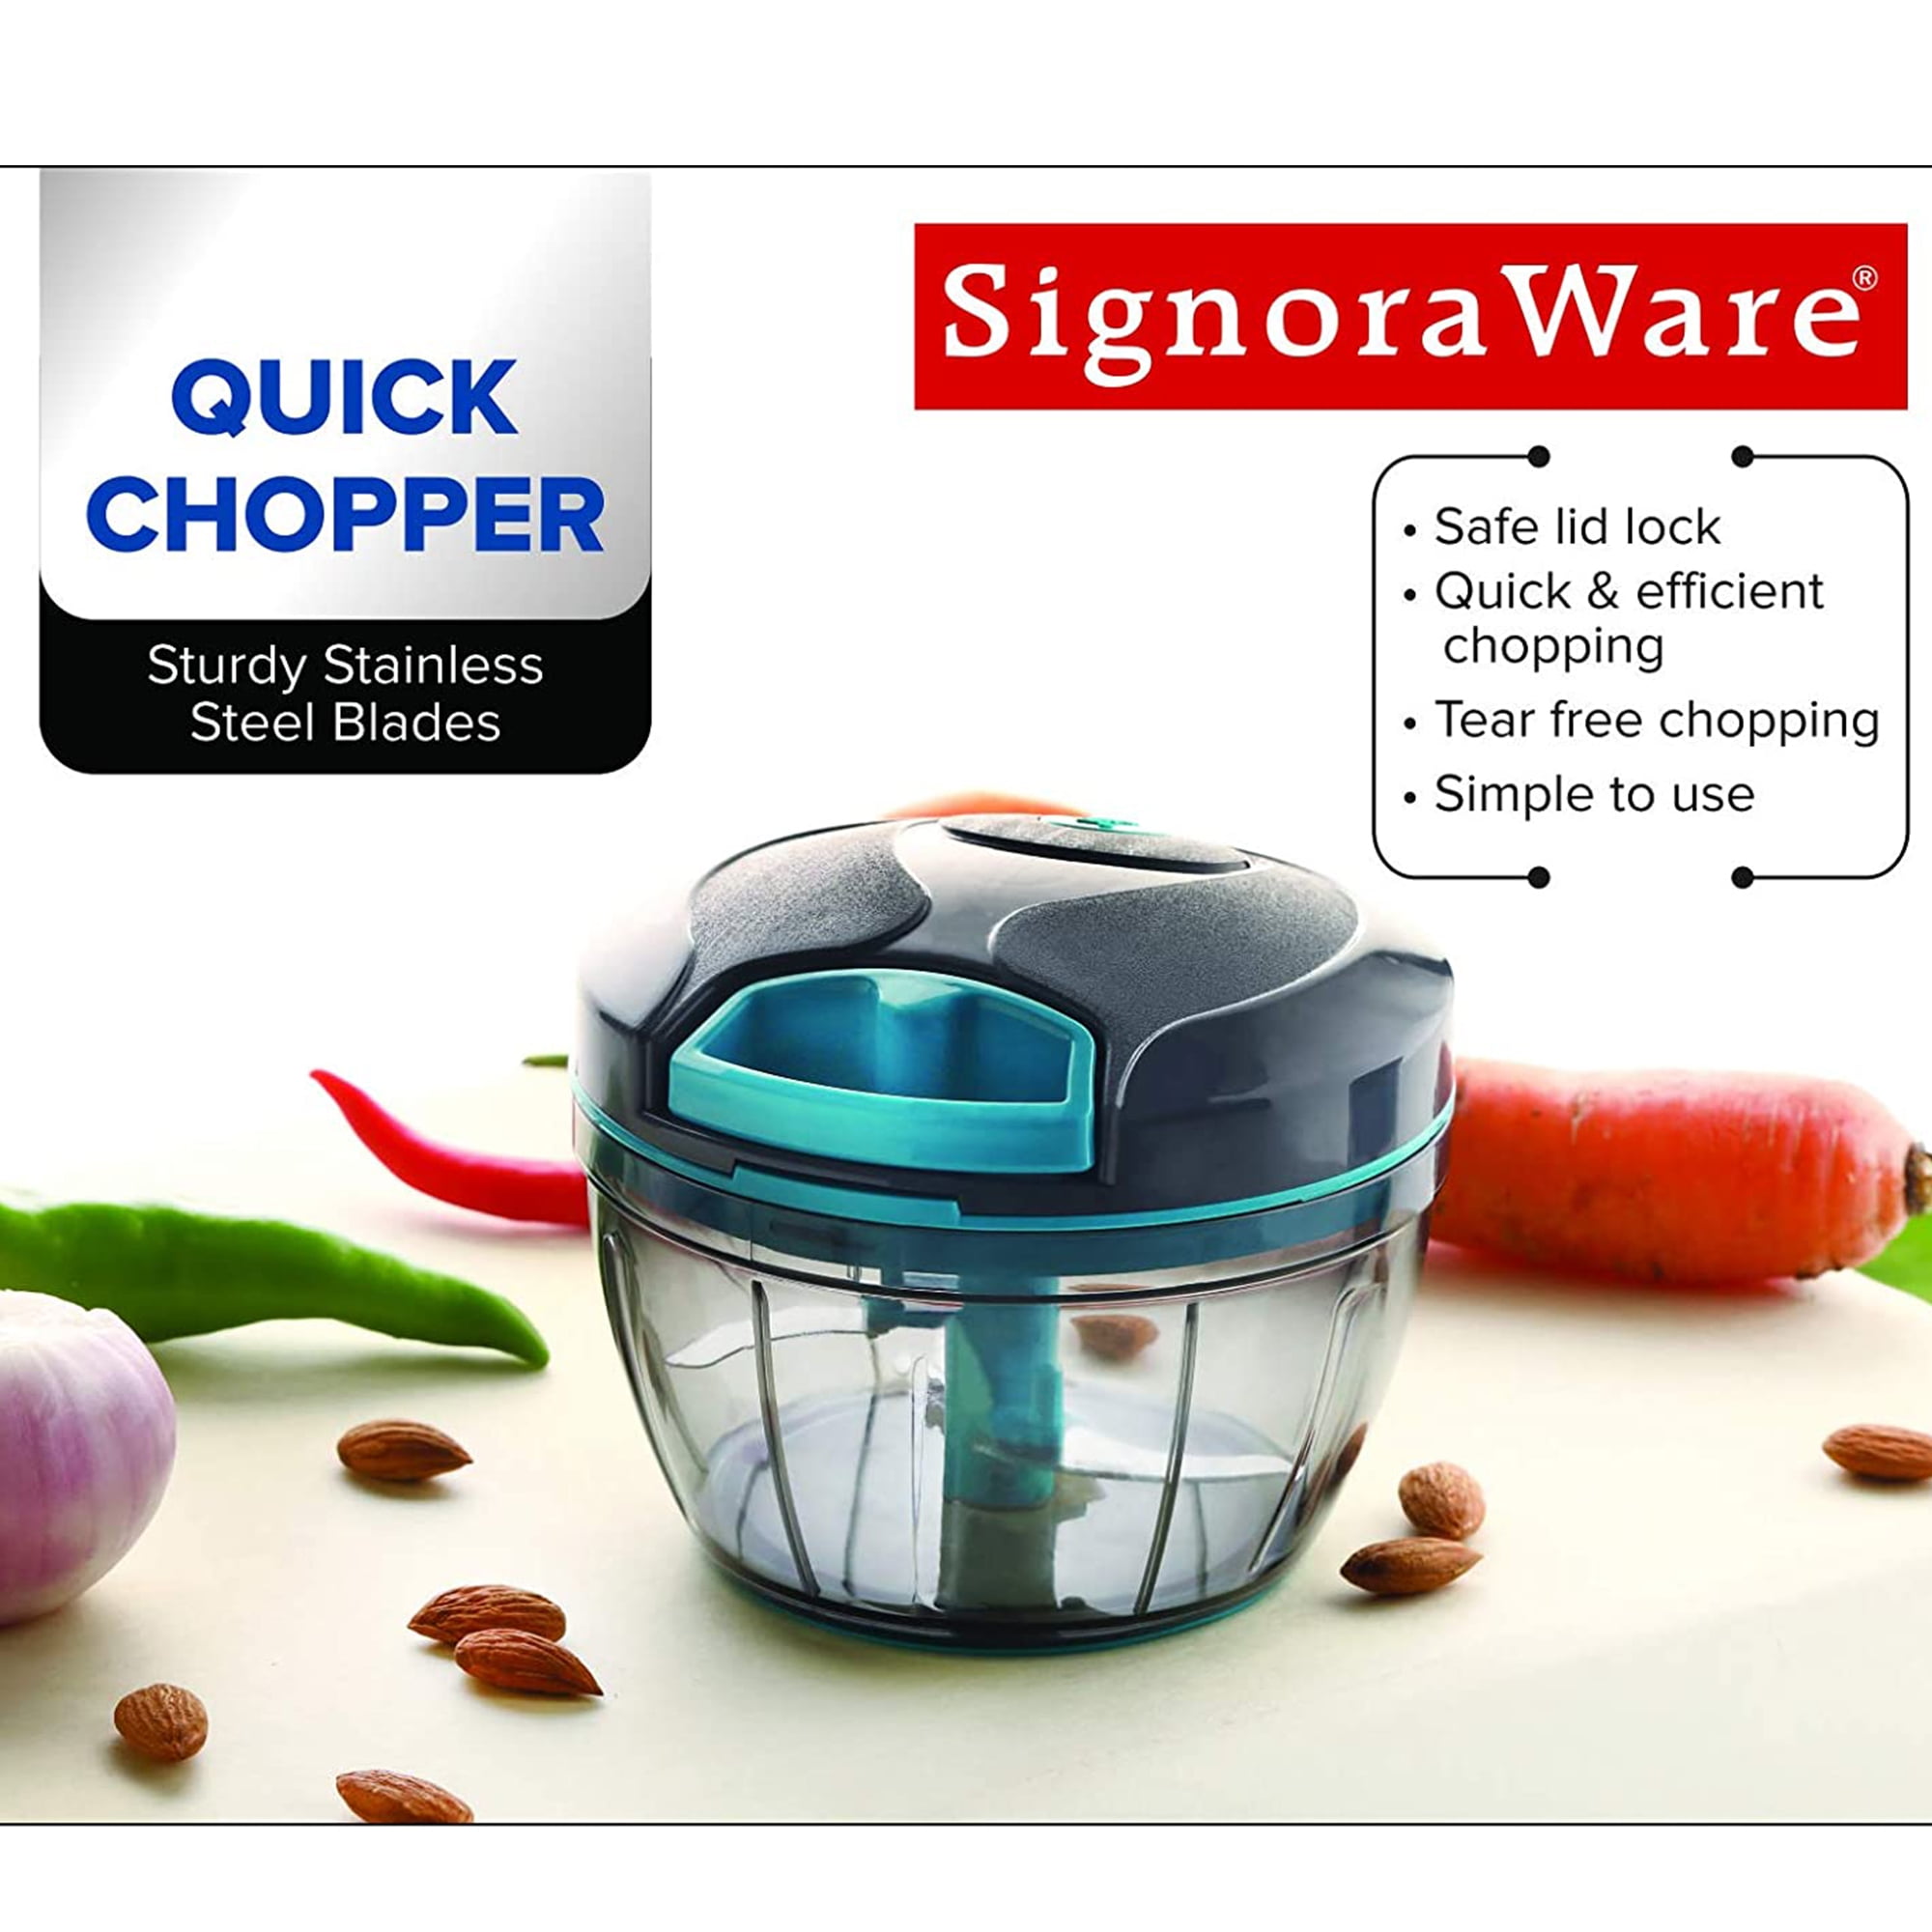 Manual Stainless Steel Compact Extra Sharp Vegetable Chopper with 5 Blades  (750 ml)0065A